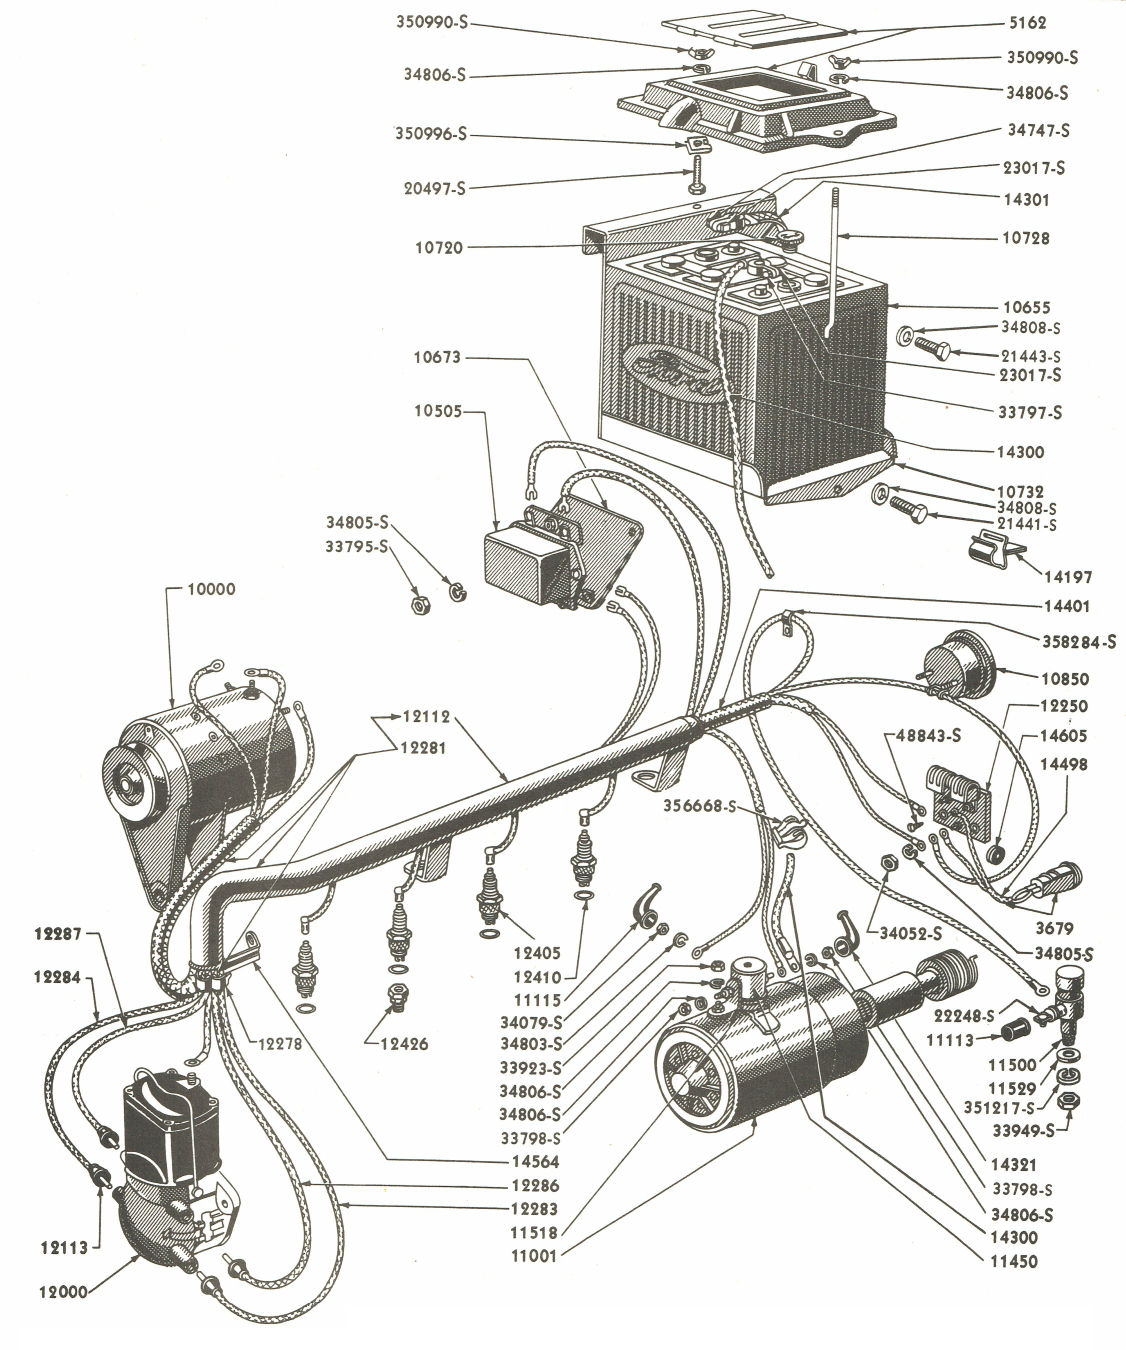 6 Volt Ford Tractor Wiring Diagram - Trusted Wiring Diagram - 8N Ford Tractor Wiring Diagram 6 Volt